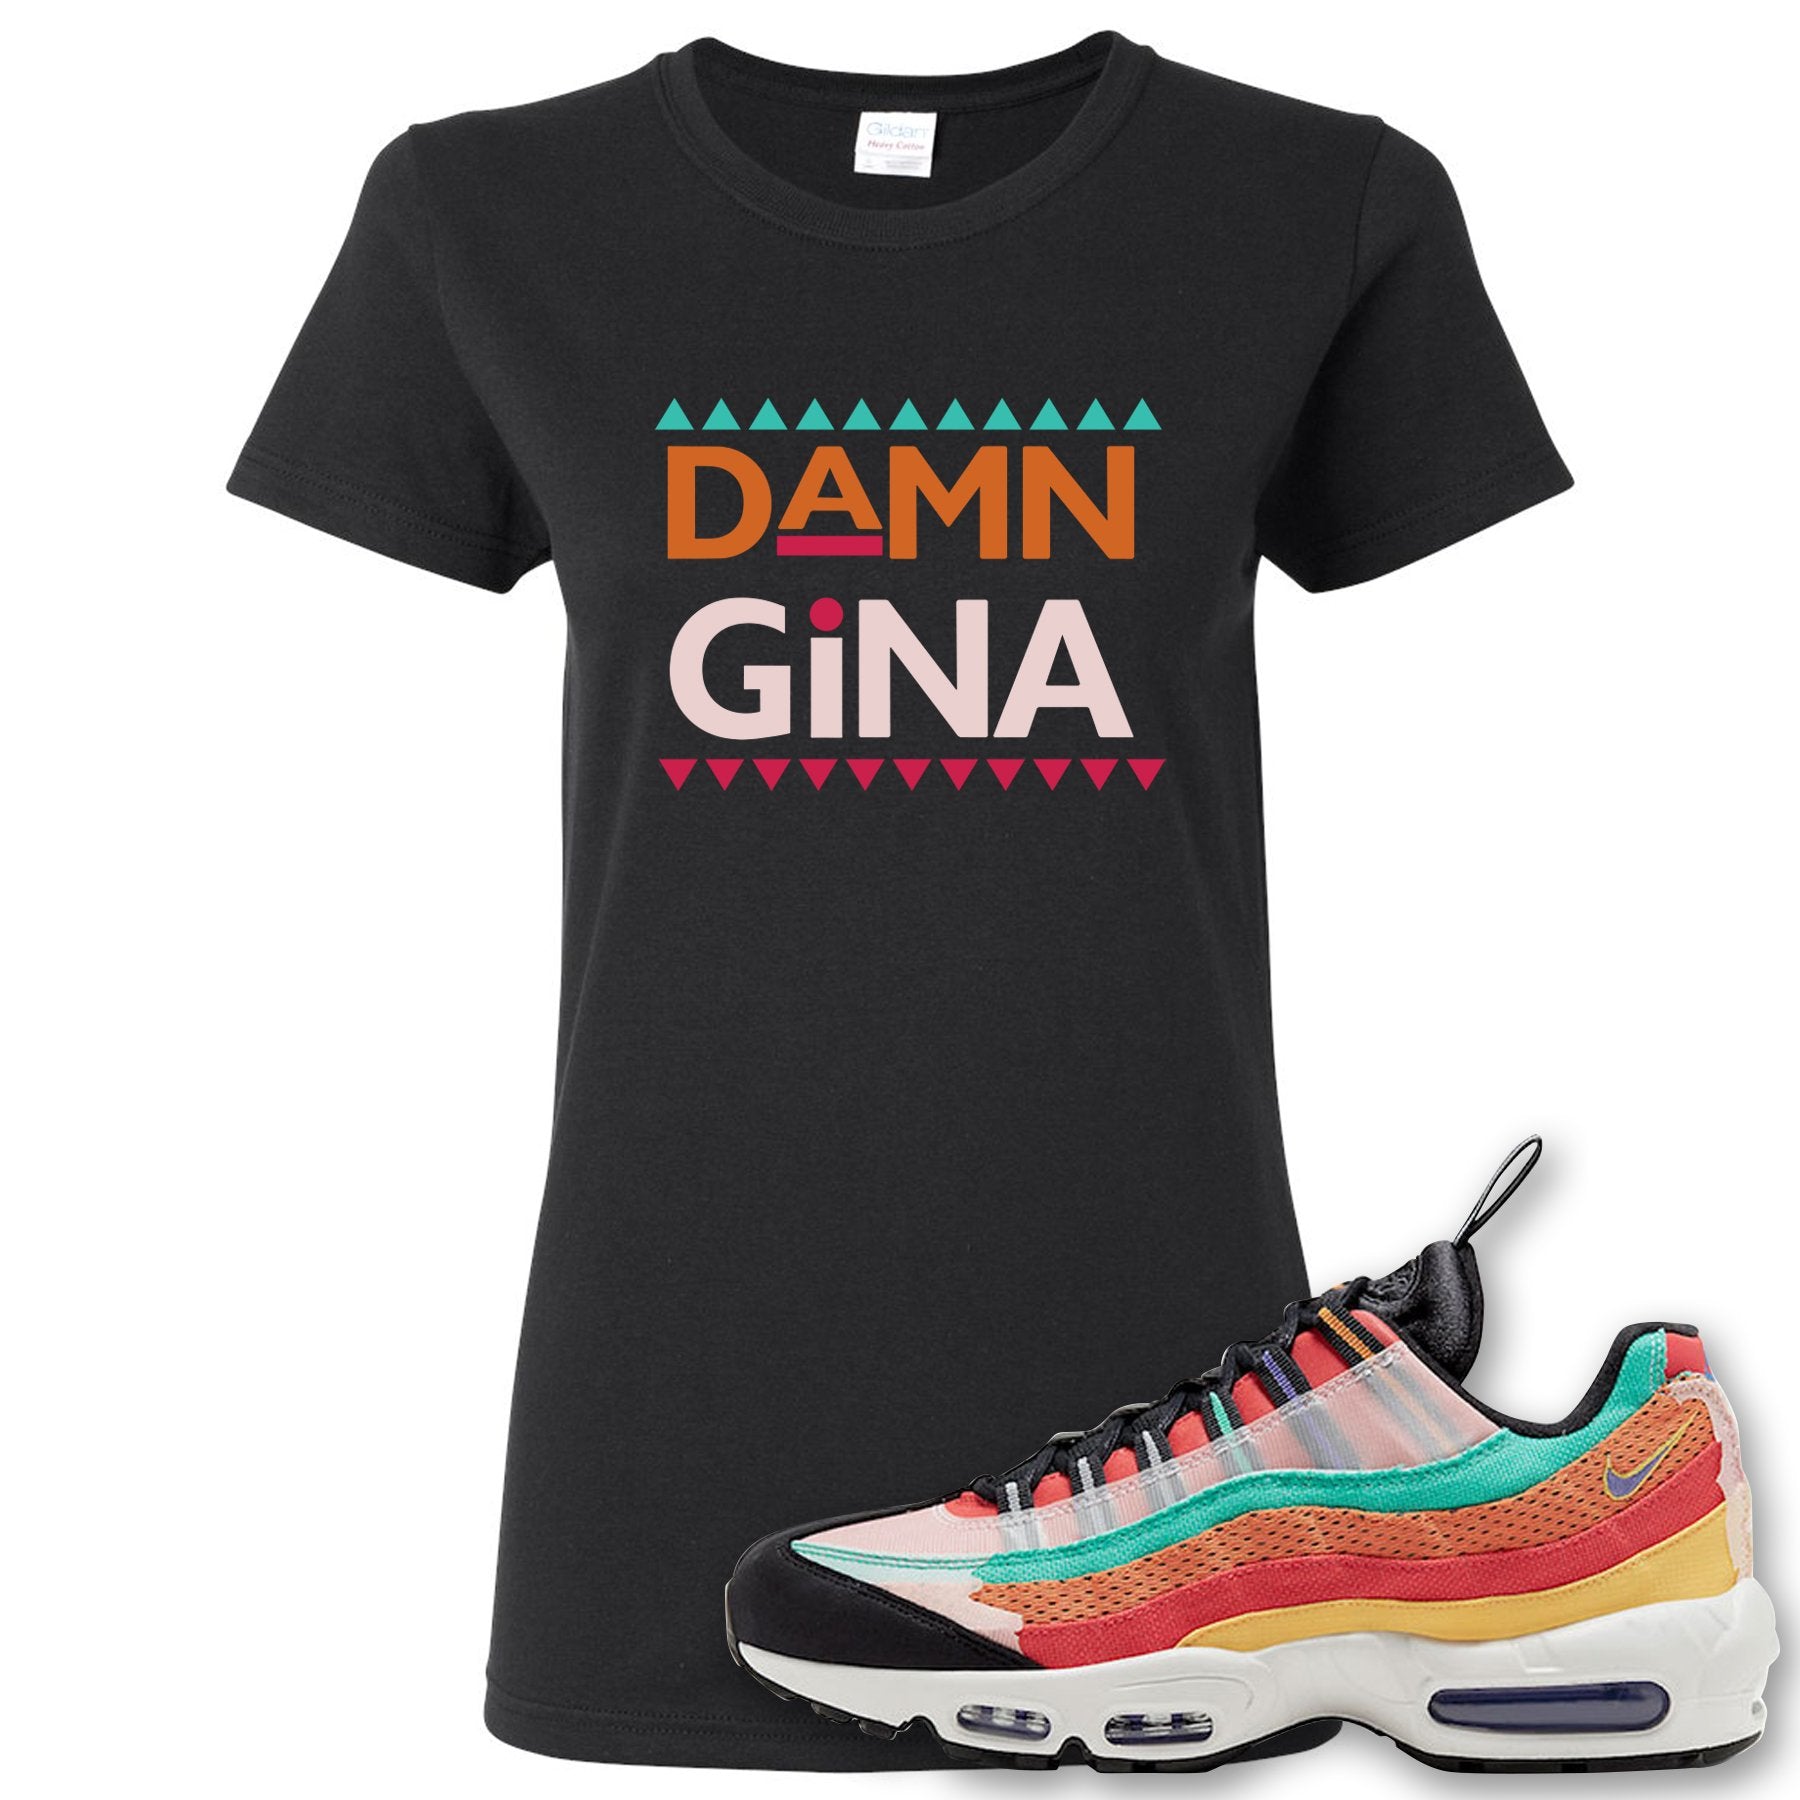 Air Max 95 Black History Month Sneaker Black Women's T Shirt | Women's Tees to match Nike Air Max 95 Black History Month Shoes | Damn Gina